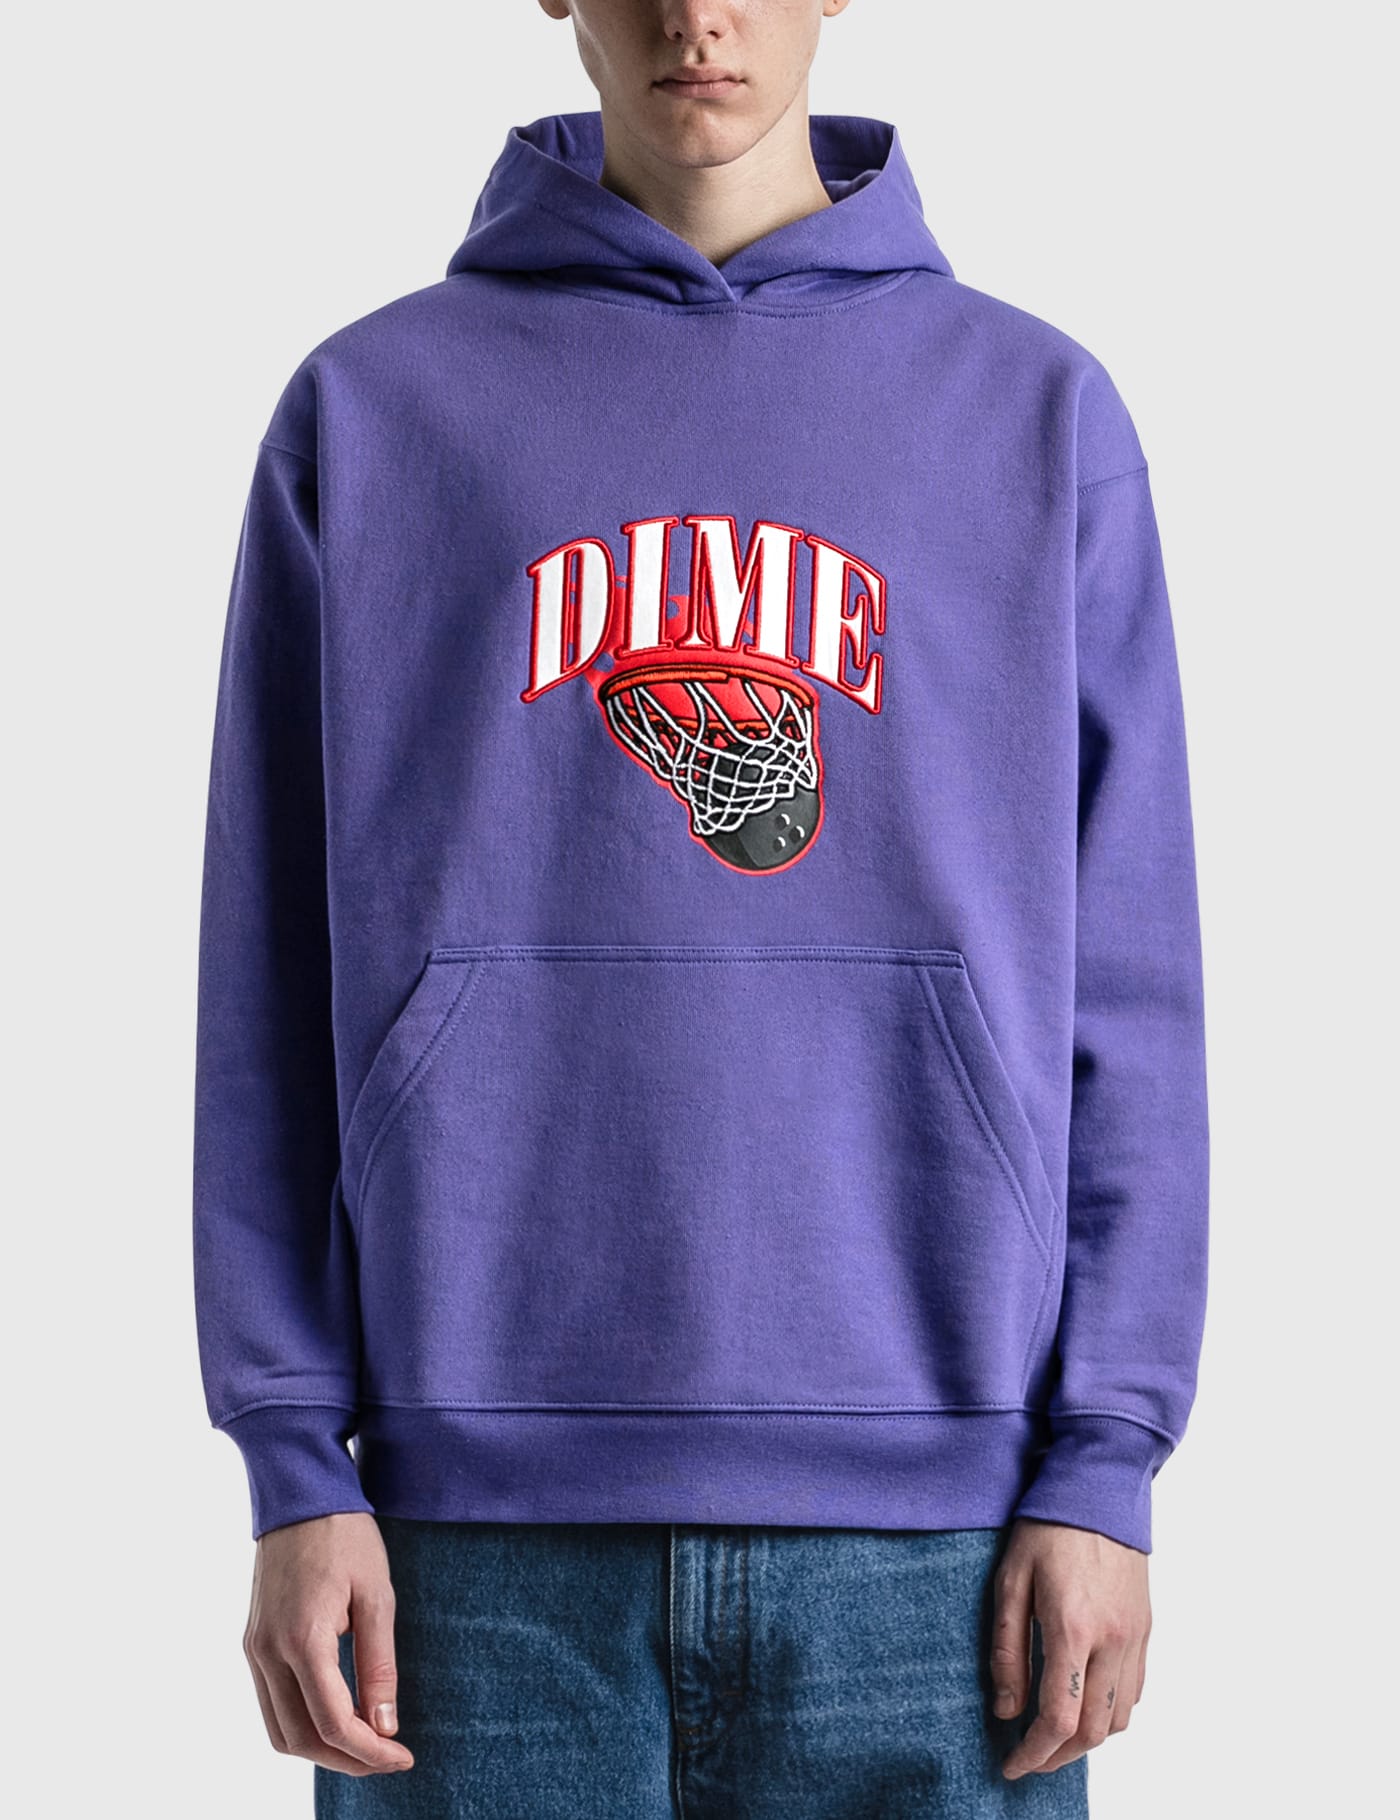 Dime - Basketbowl Patch Hoodie | HBX - Globally Curated Fashion 